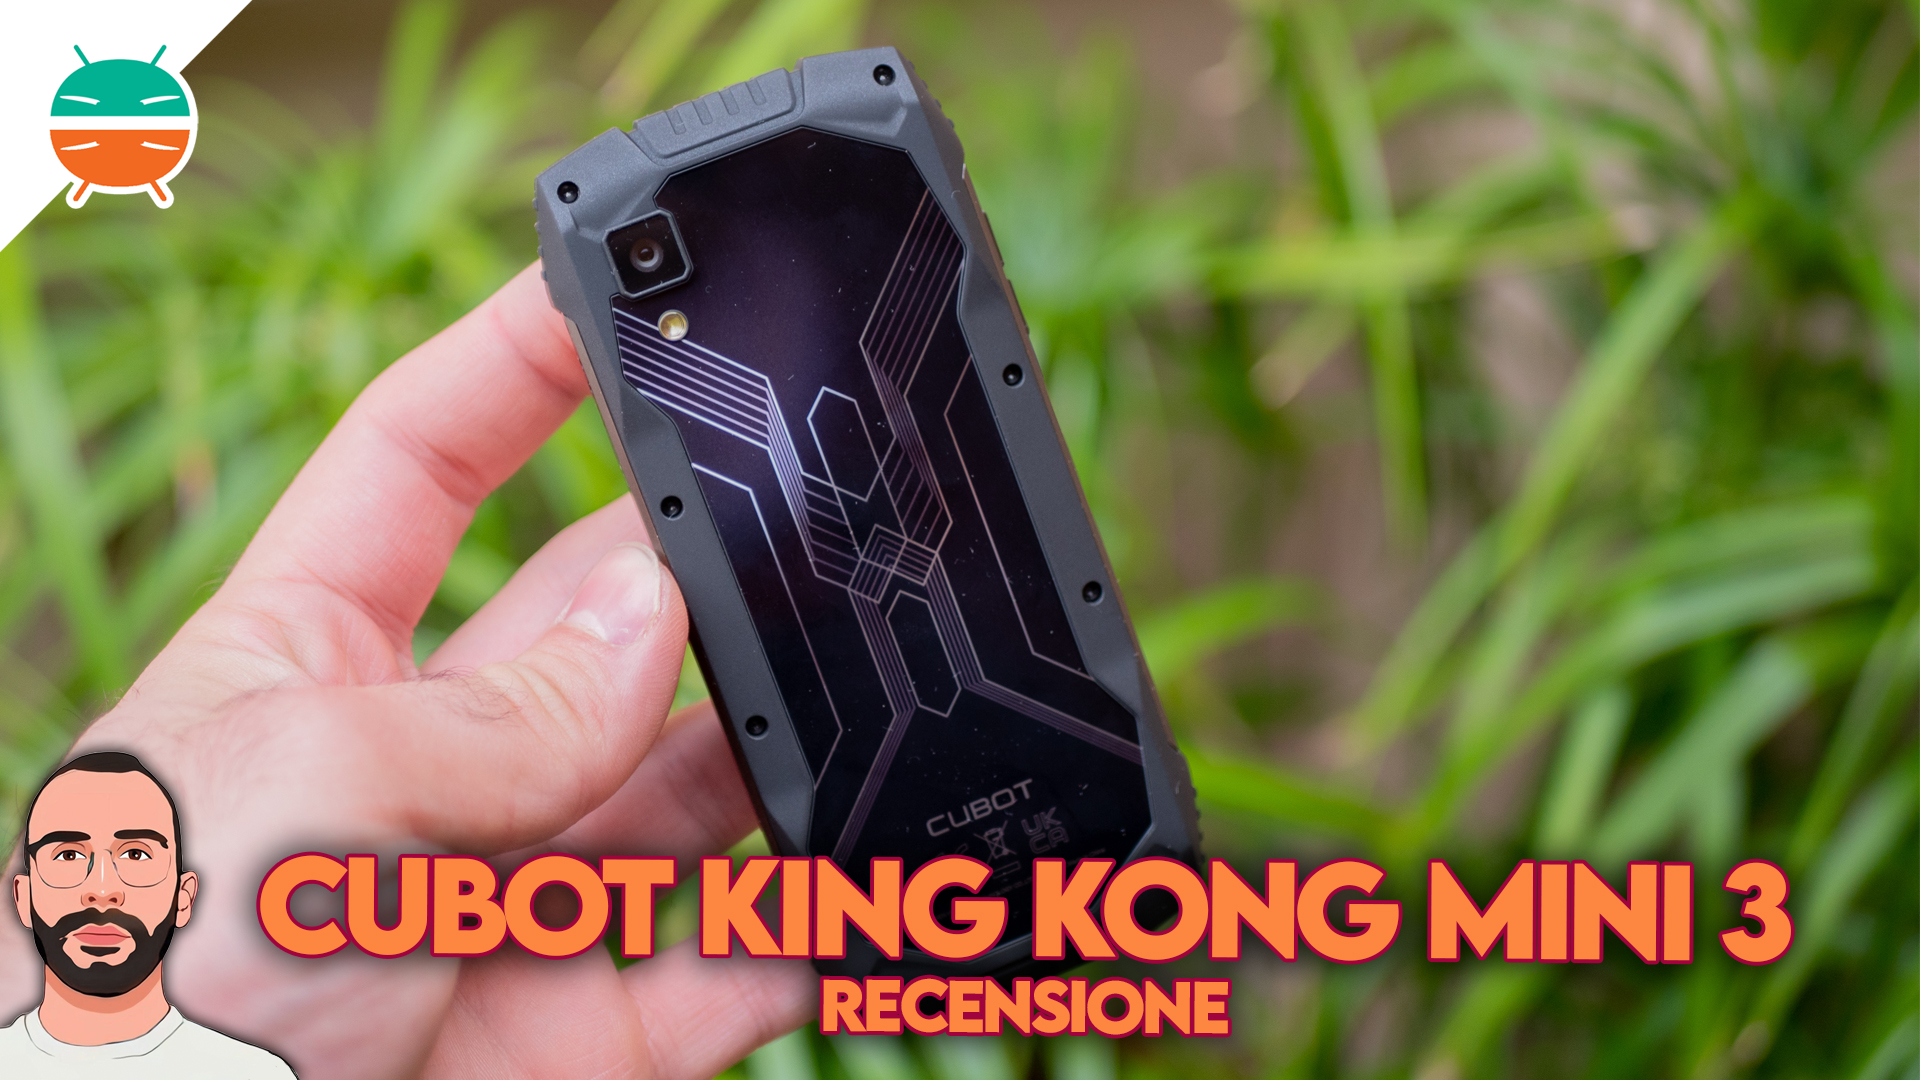 Cubot KingKong Mini 3 REVIEW: This Is The Best Size For Rugged Phone! 